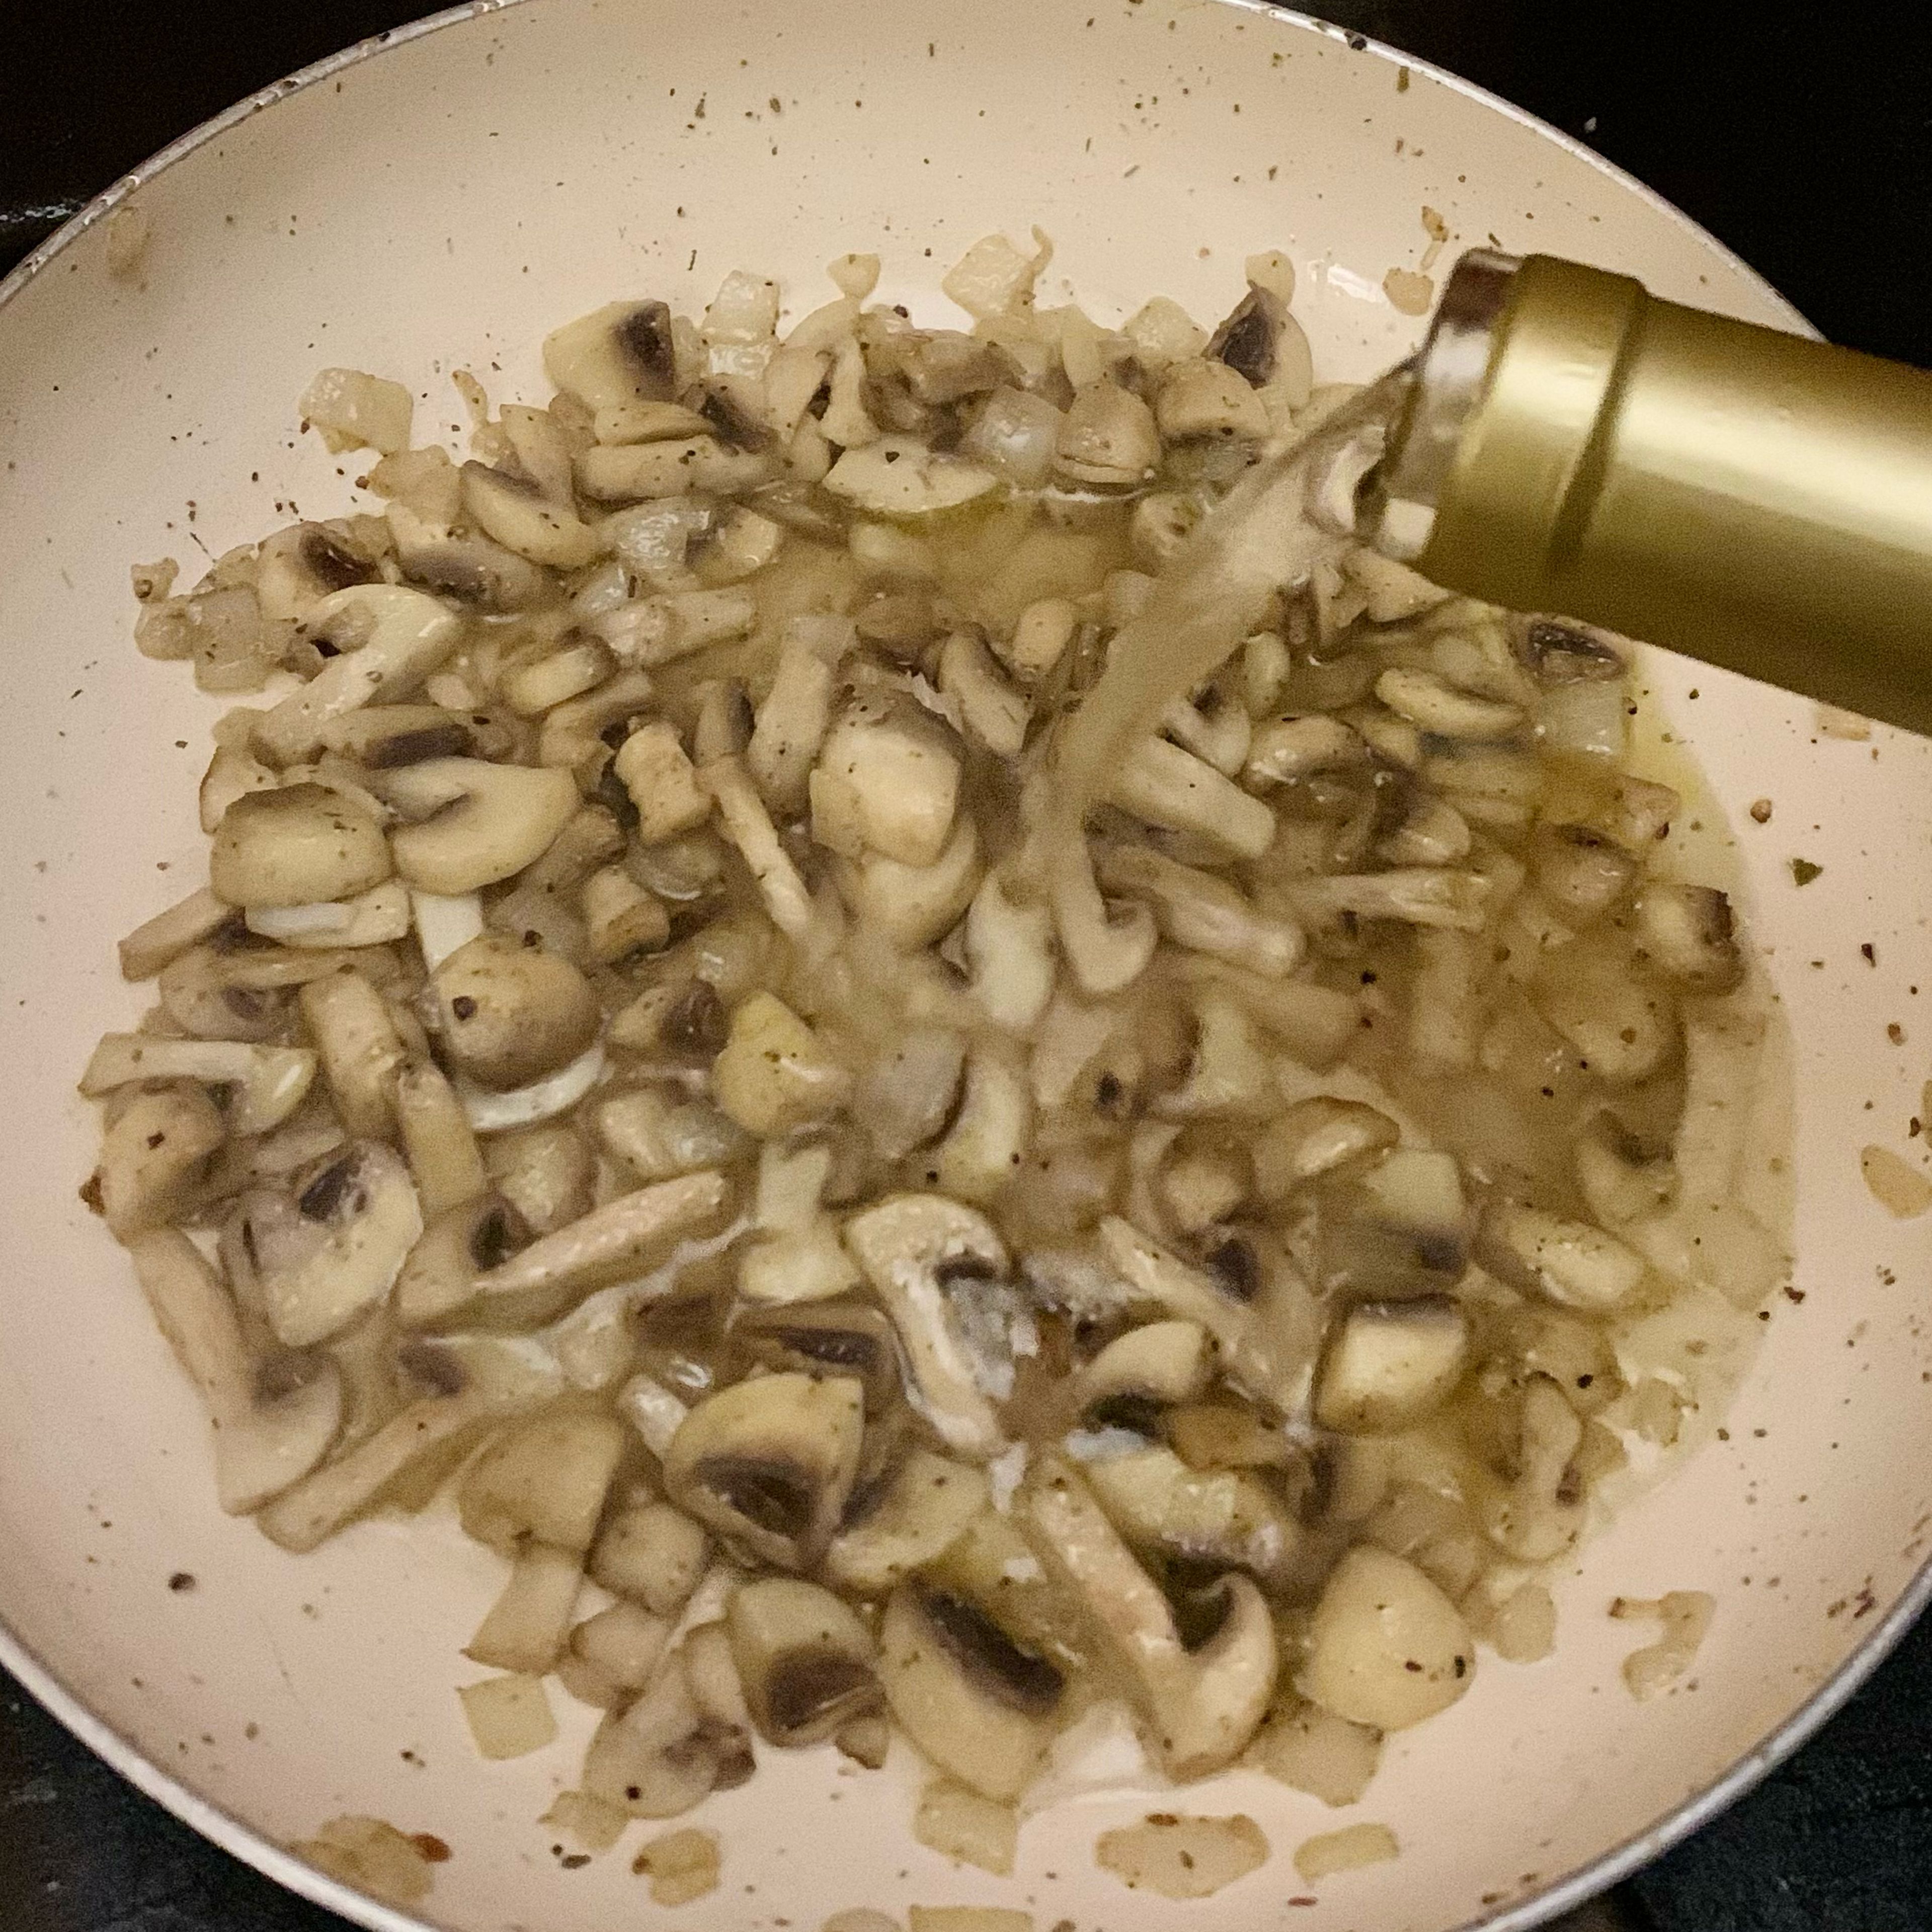 When the onion is smelling good and cooked, let’s add the mushrooms and stir till they’re half cooked, when we will add the wine and wait for it to evaporate the alcohol. 